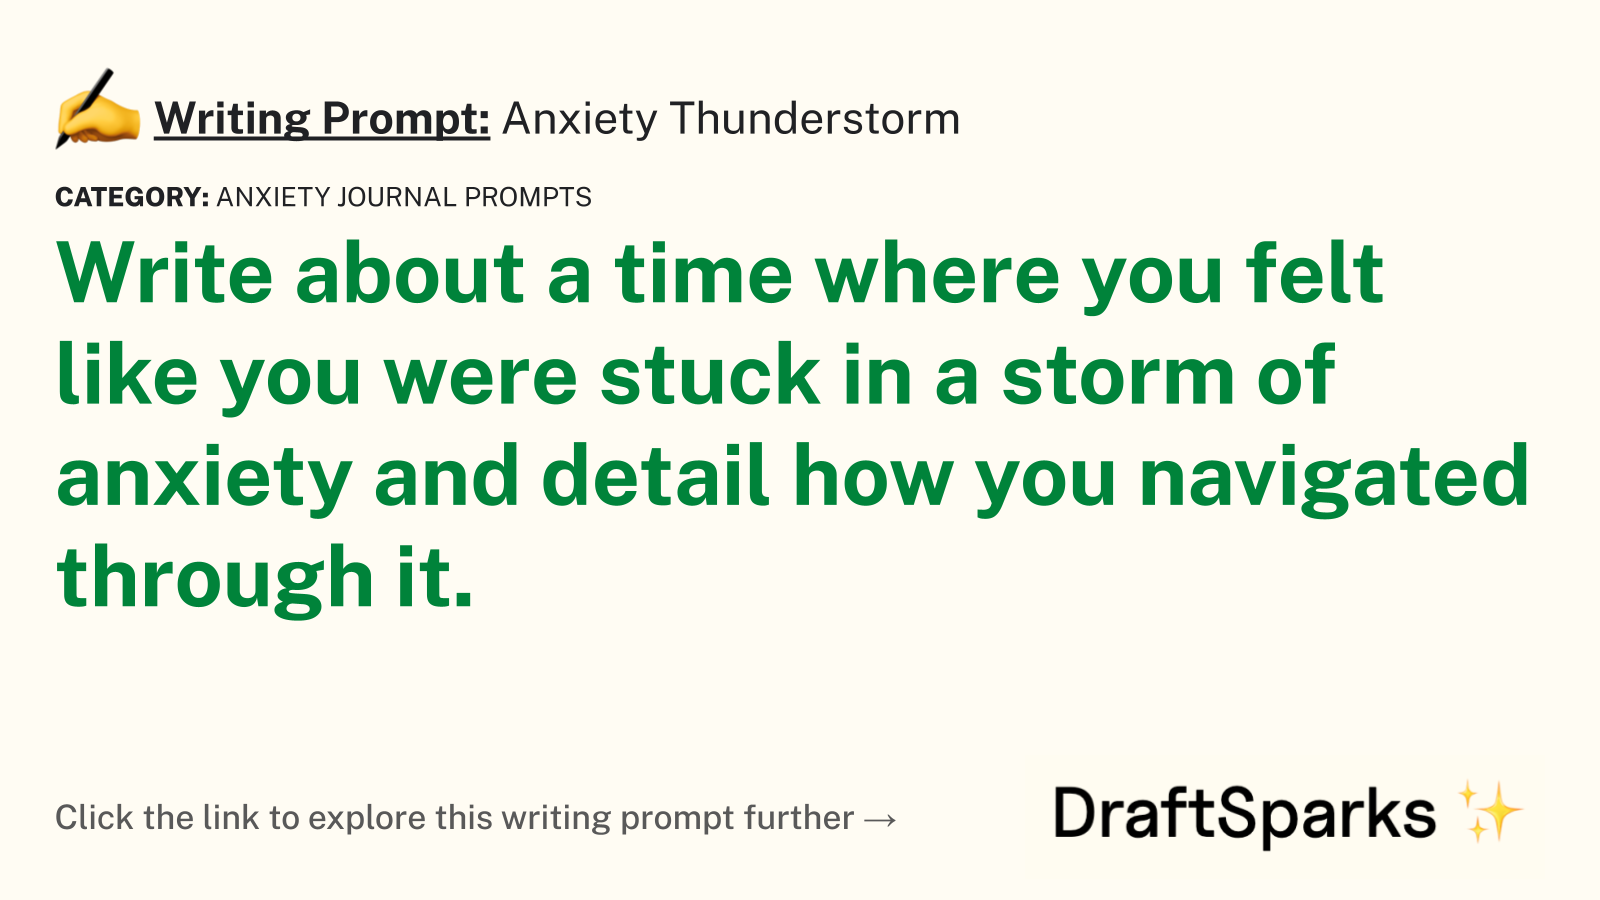 Anxiety Thunderstorm